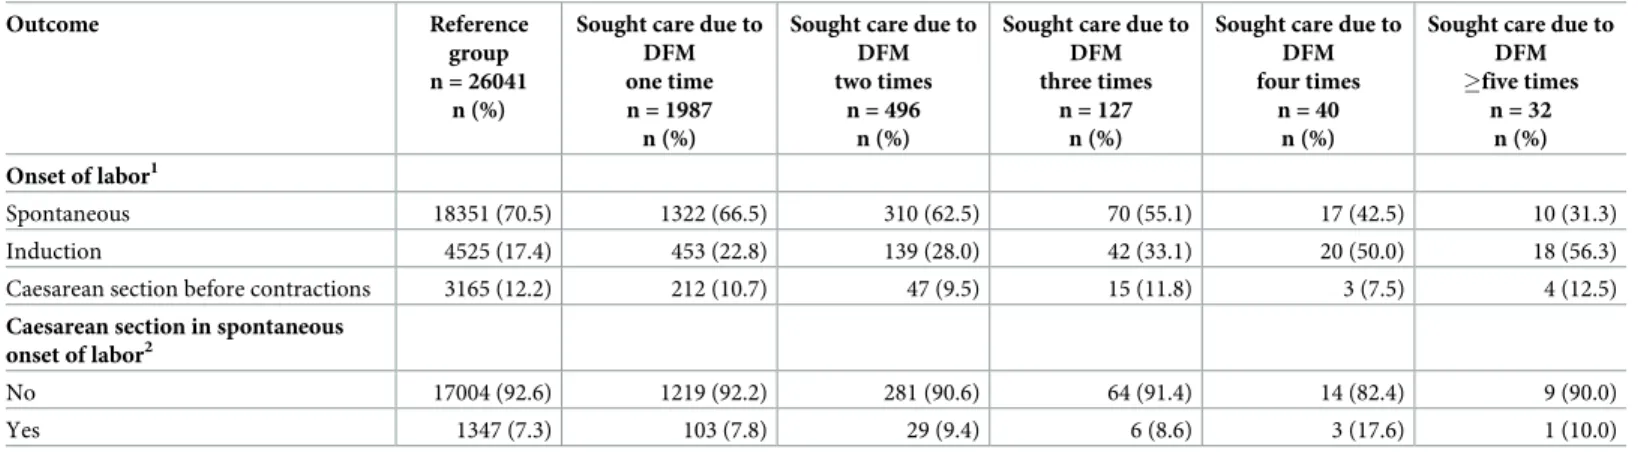 Table 2. Pregnancy outcomes of women who gave birth in 2014 (Reference group) and women who sought care due to decreased or altered fetal movements (DFM group) divided after number of occasions the women sought care.